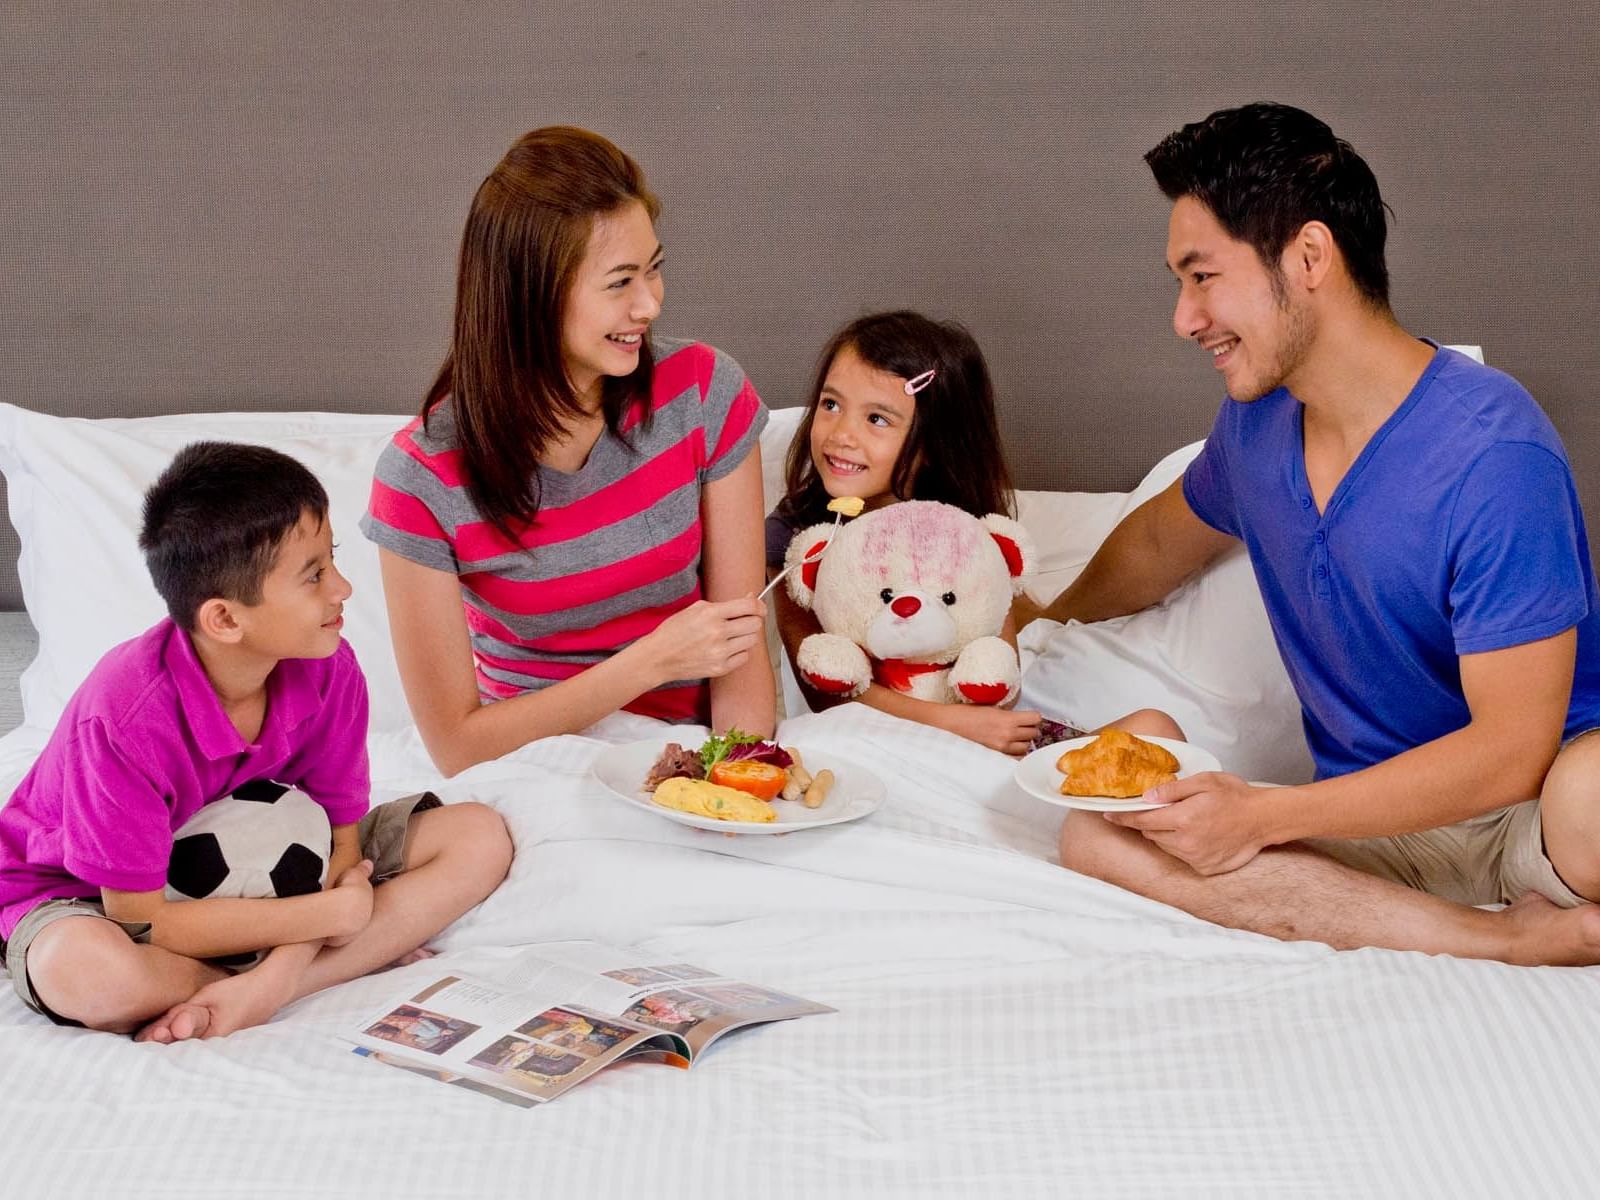 A family enjoying food and company on the bed (Room service)